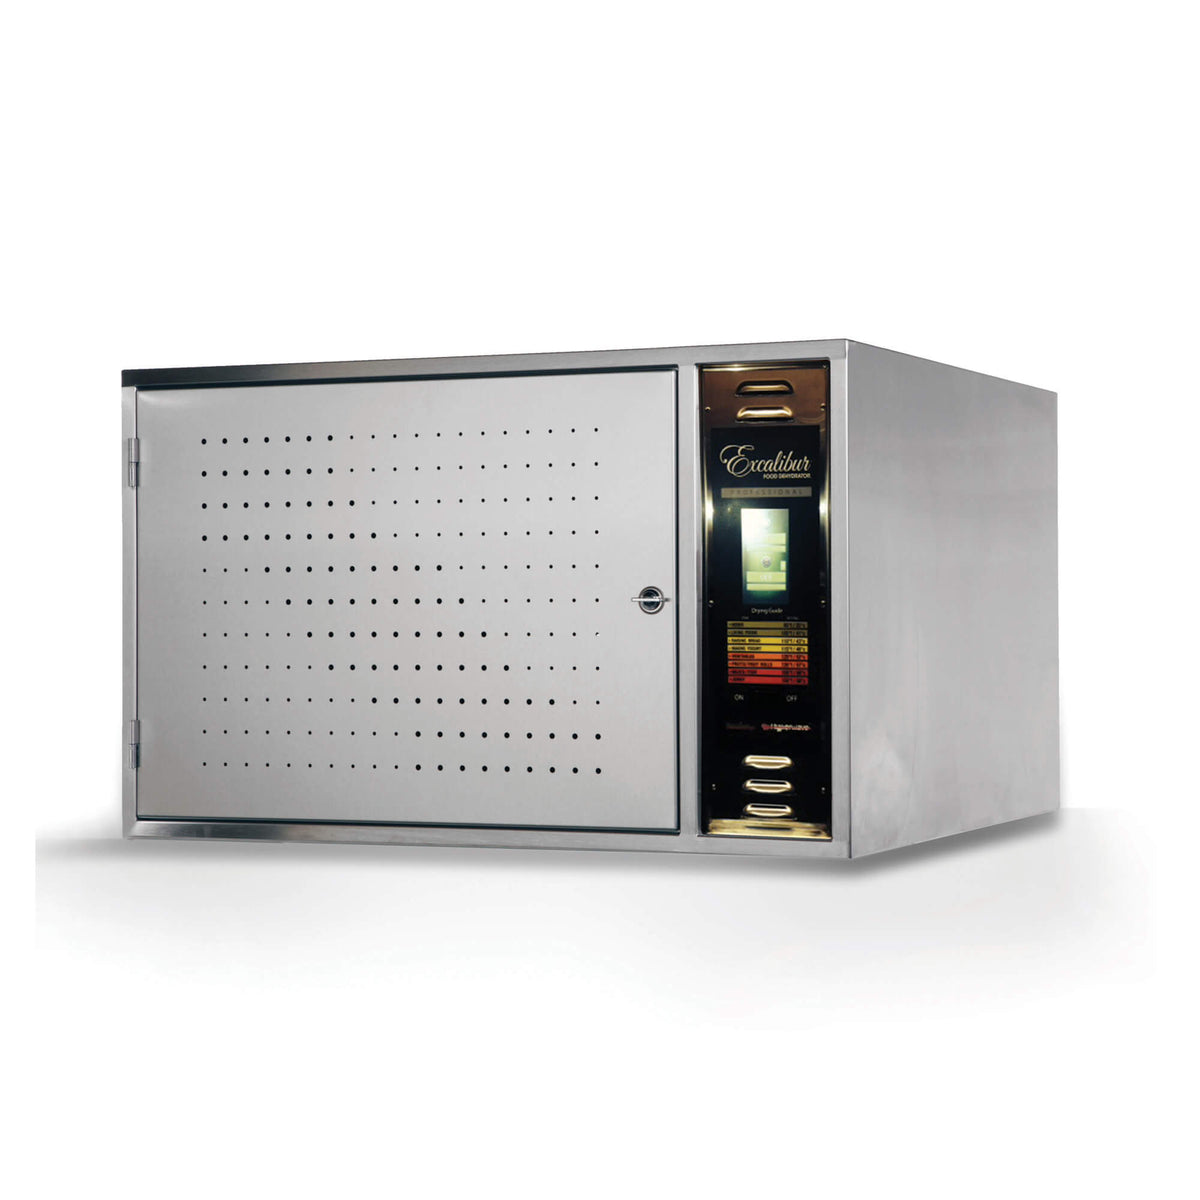 Excalibur COMM1 12 tray stainless steel commercial digital dehydrator with door closed.